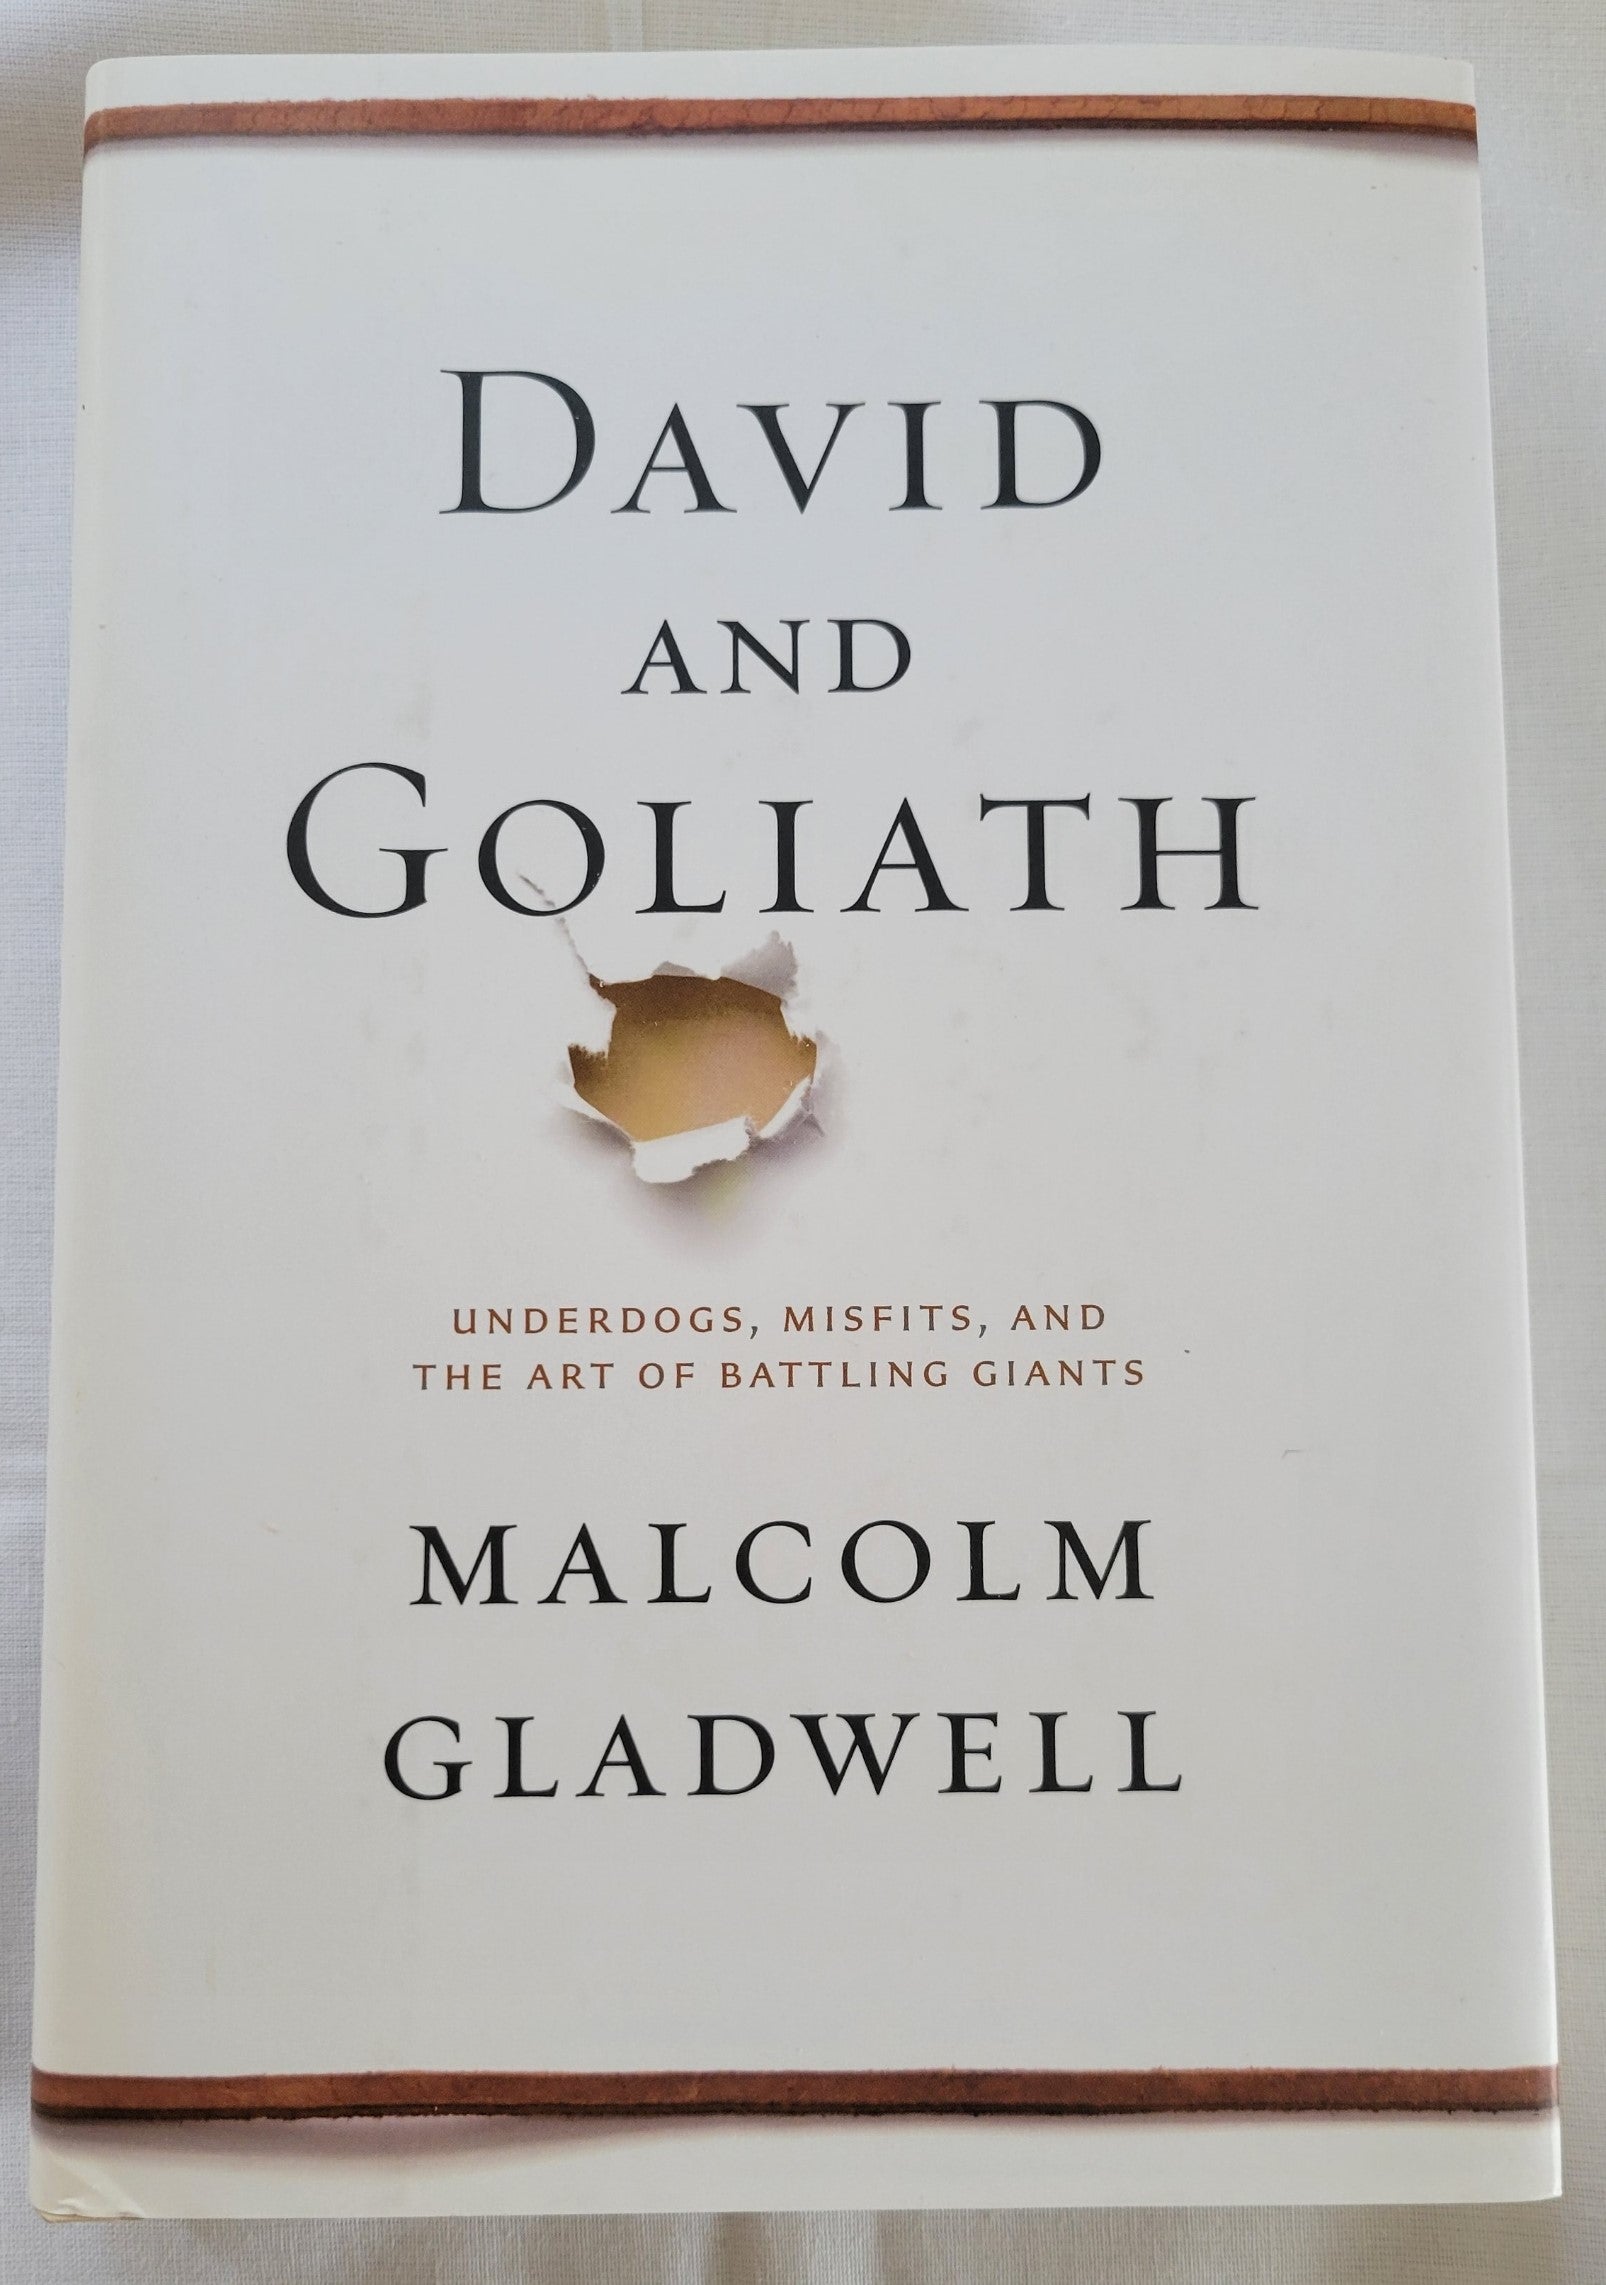 Used book David and Goliath: Underdogs, Misfits, and the Art of Battling Giants, written by Malcolm Gladwell.  View of front cover.